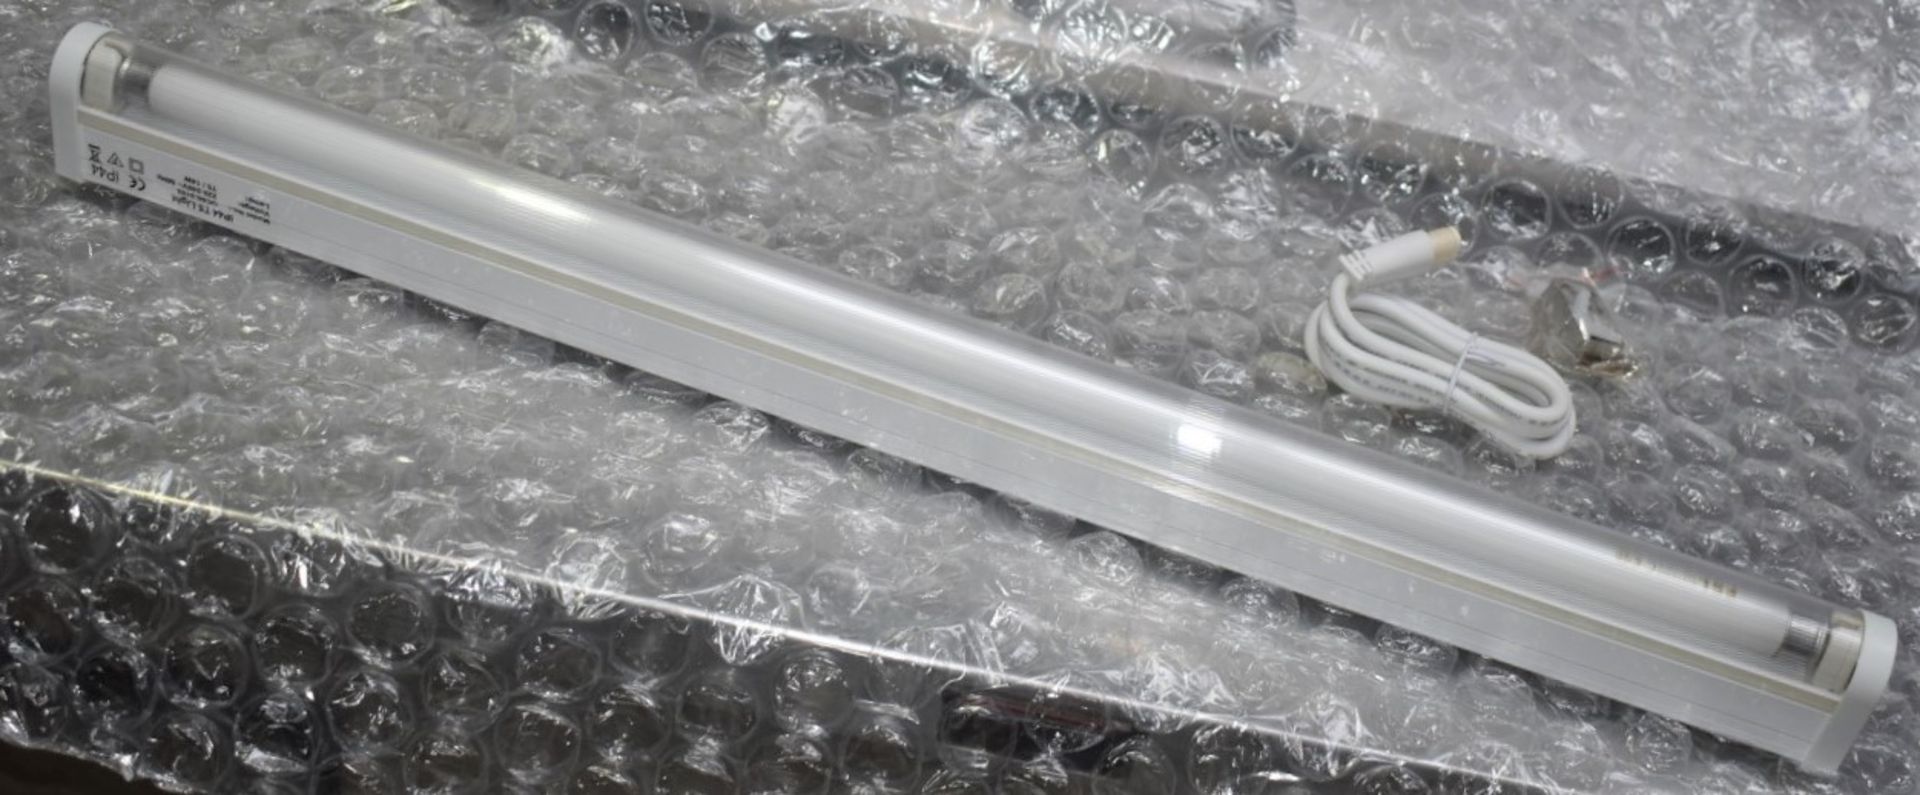 4 x Bathroom Light Fittings - IP44 Waterproof T5 14w Fluorescent Lights With Built-In Electronic - Image 8 of 11